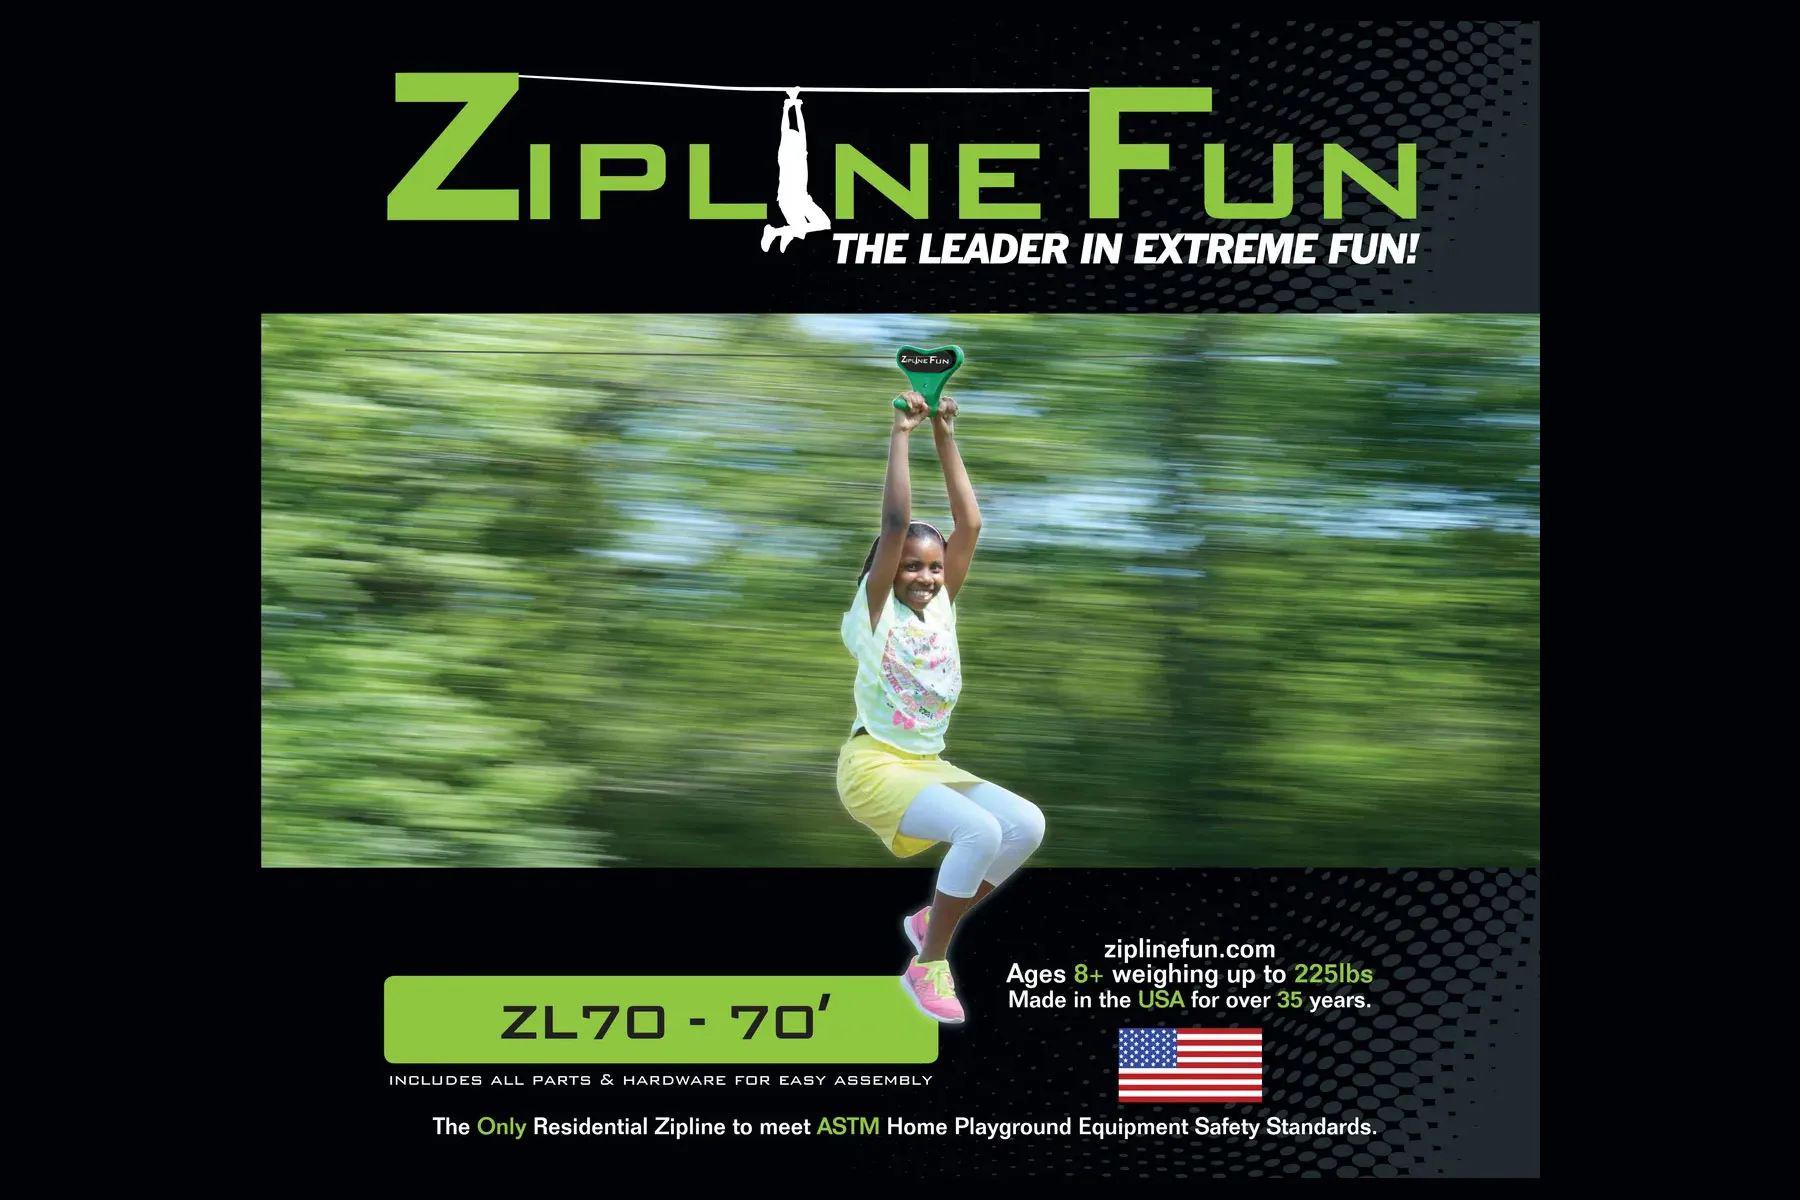 The best Zipline Fun of all! The ZL70 – 70′ Zip Line is built with safety, durability and fun in mind, perfect for daredevils young and old.